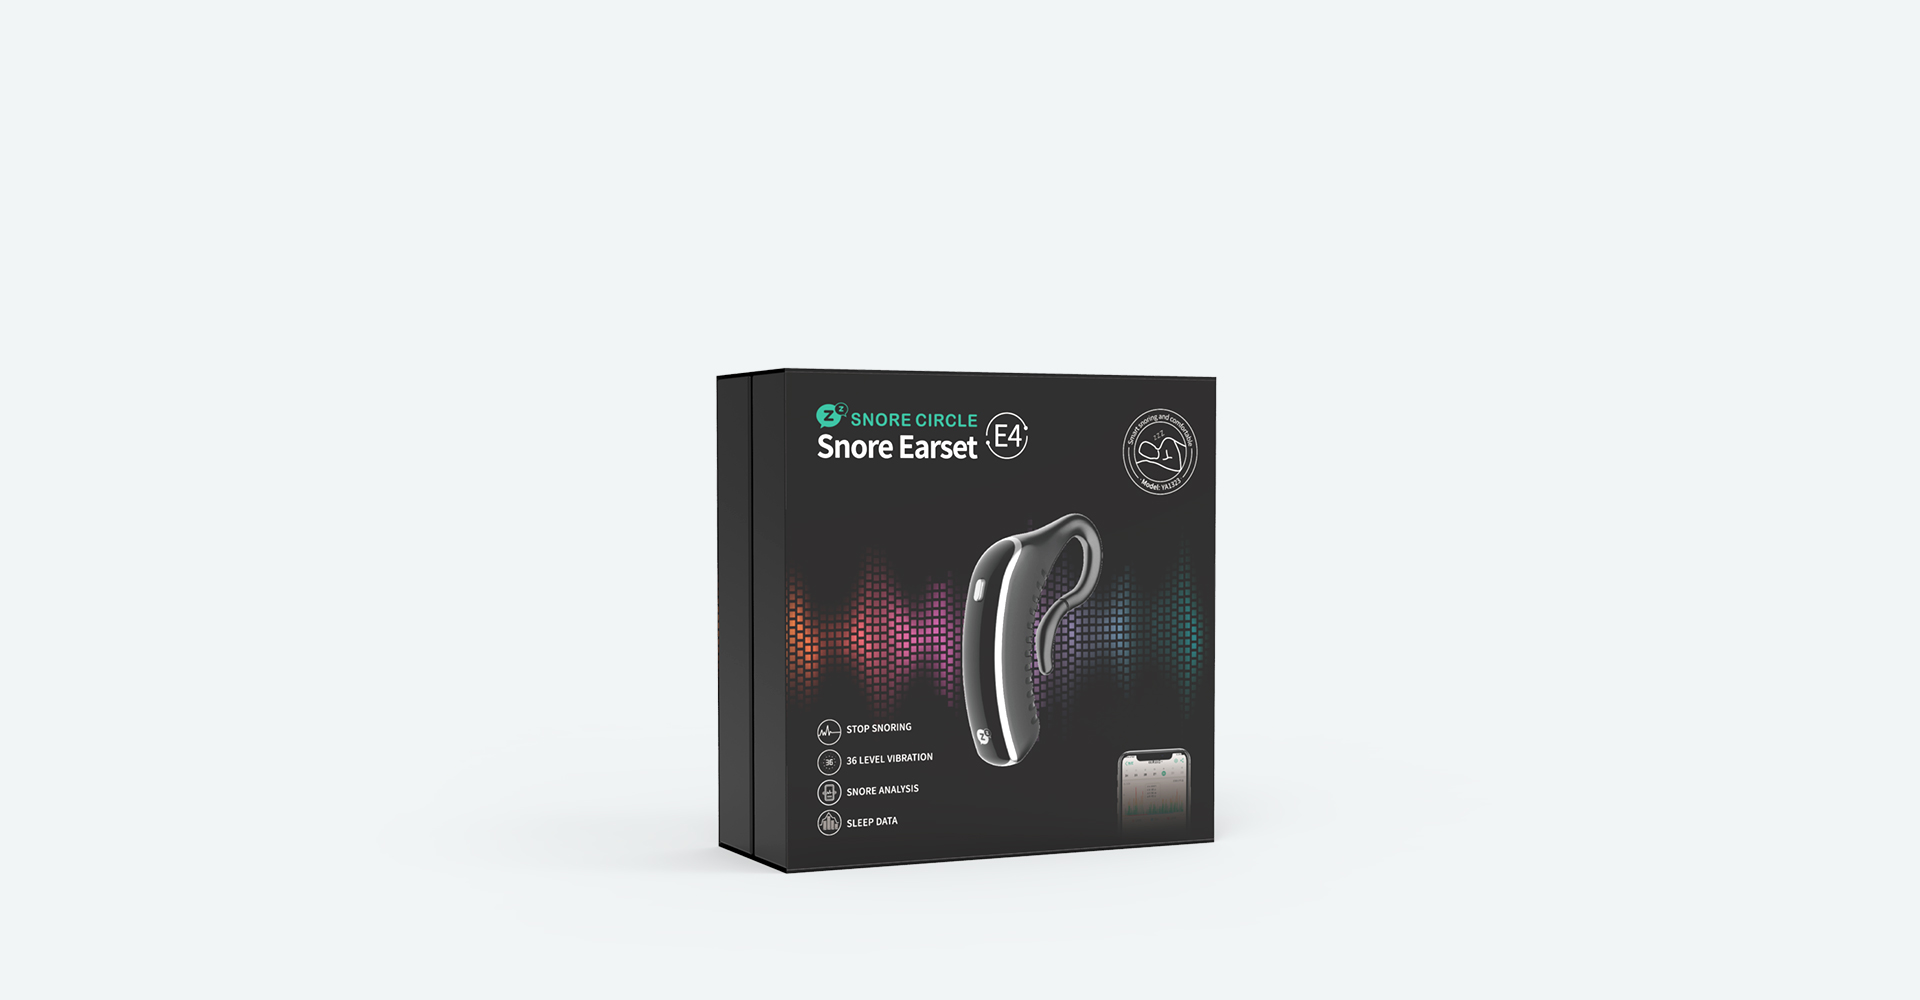 Snore Earset E4 - Snoring intervention for peaceful sleep